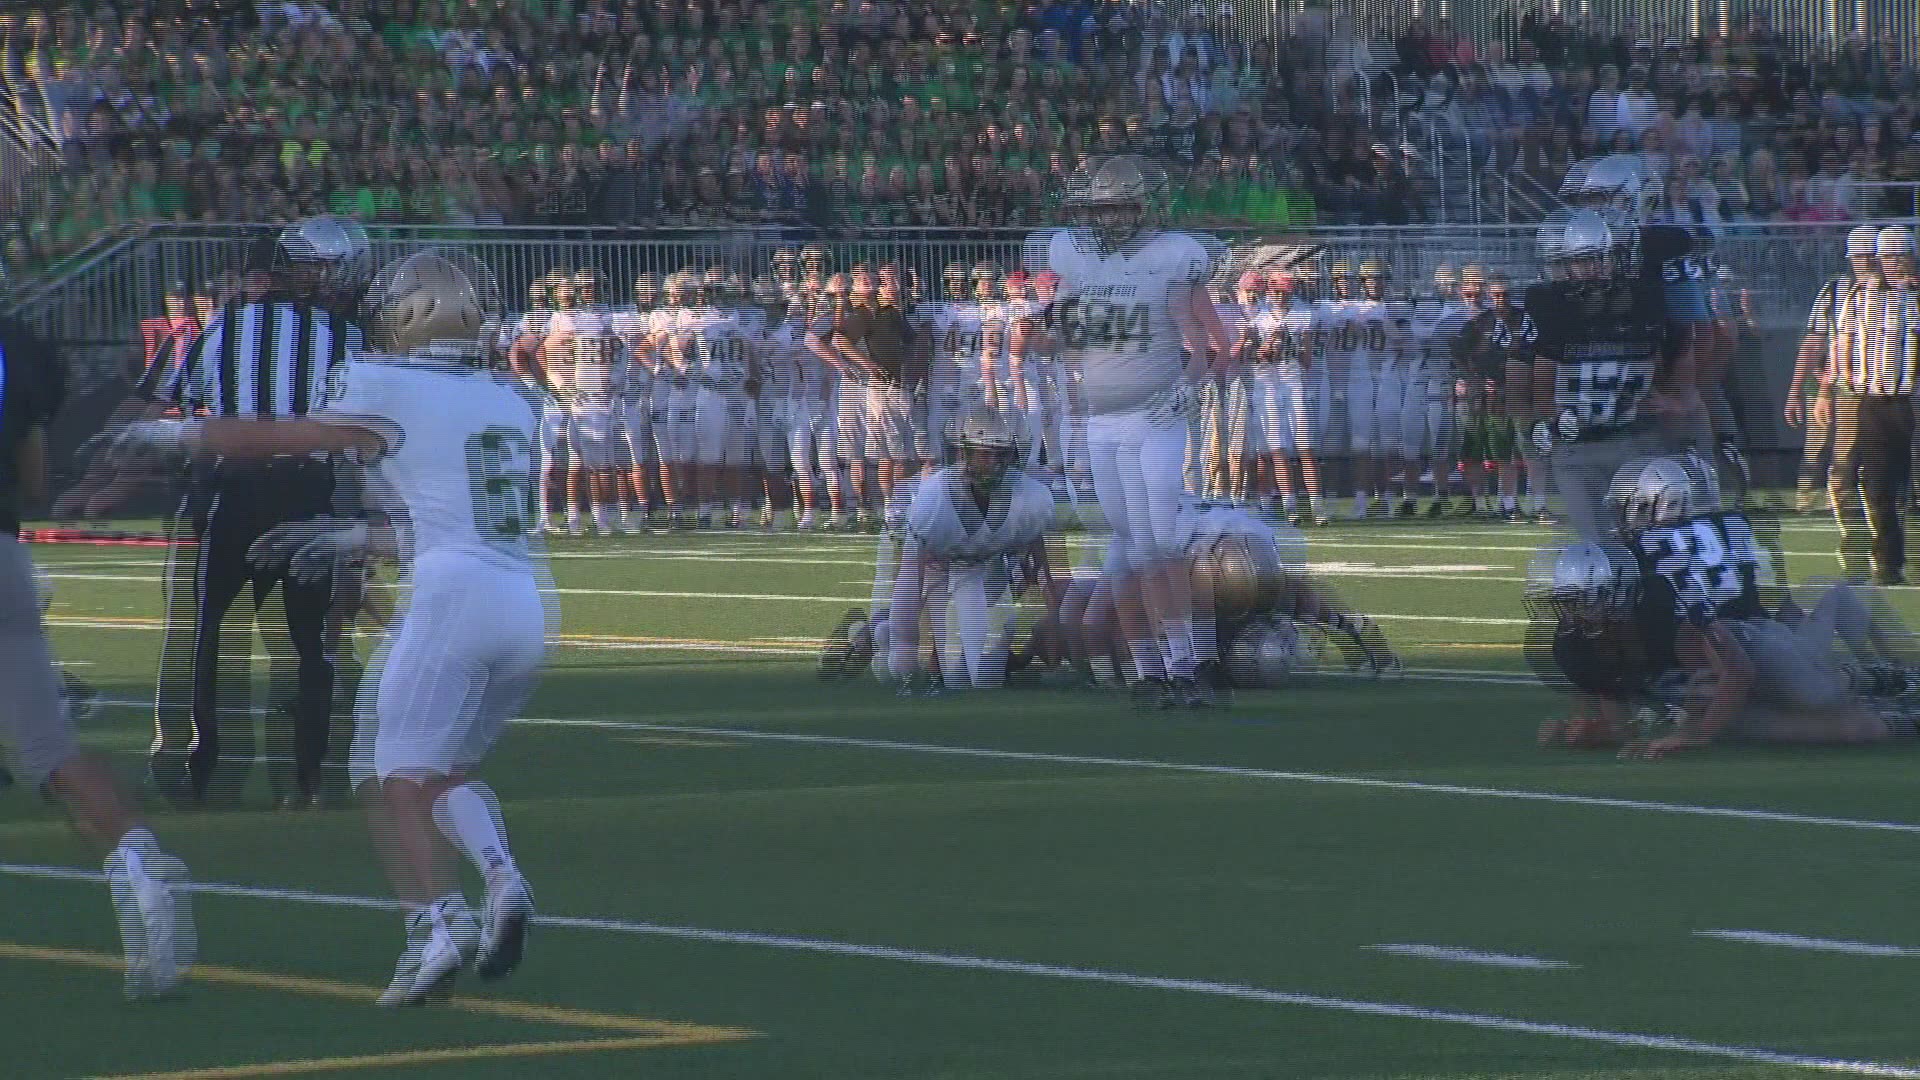 Highlights of the Jesuit Crusaders' 2018 season in Oregon. Jesuit finished with an 11-2 record and made it to the state semifinals. All highlights aired on KGW's Friday Night Flights #KGWPreps